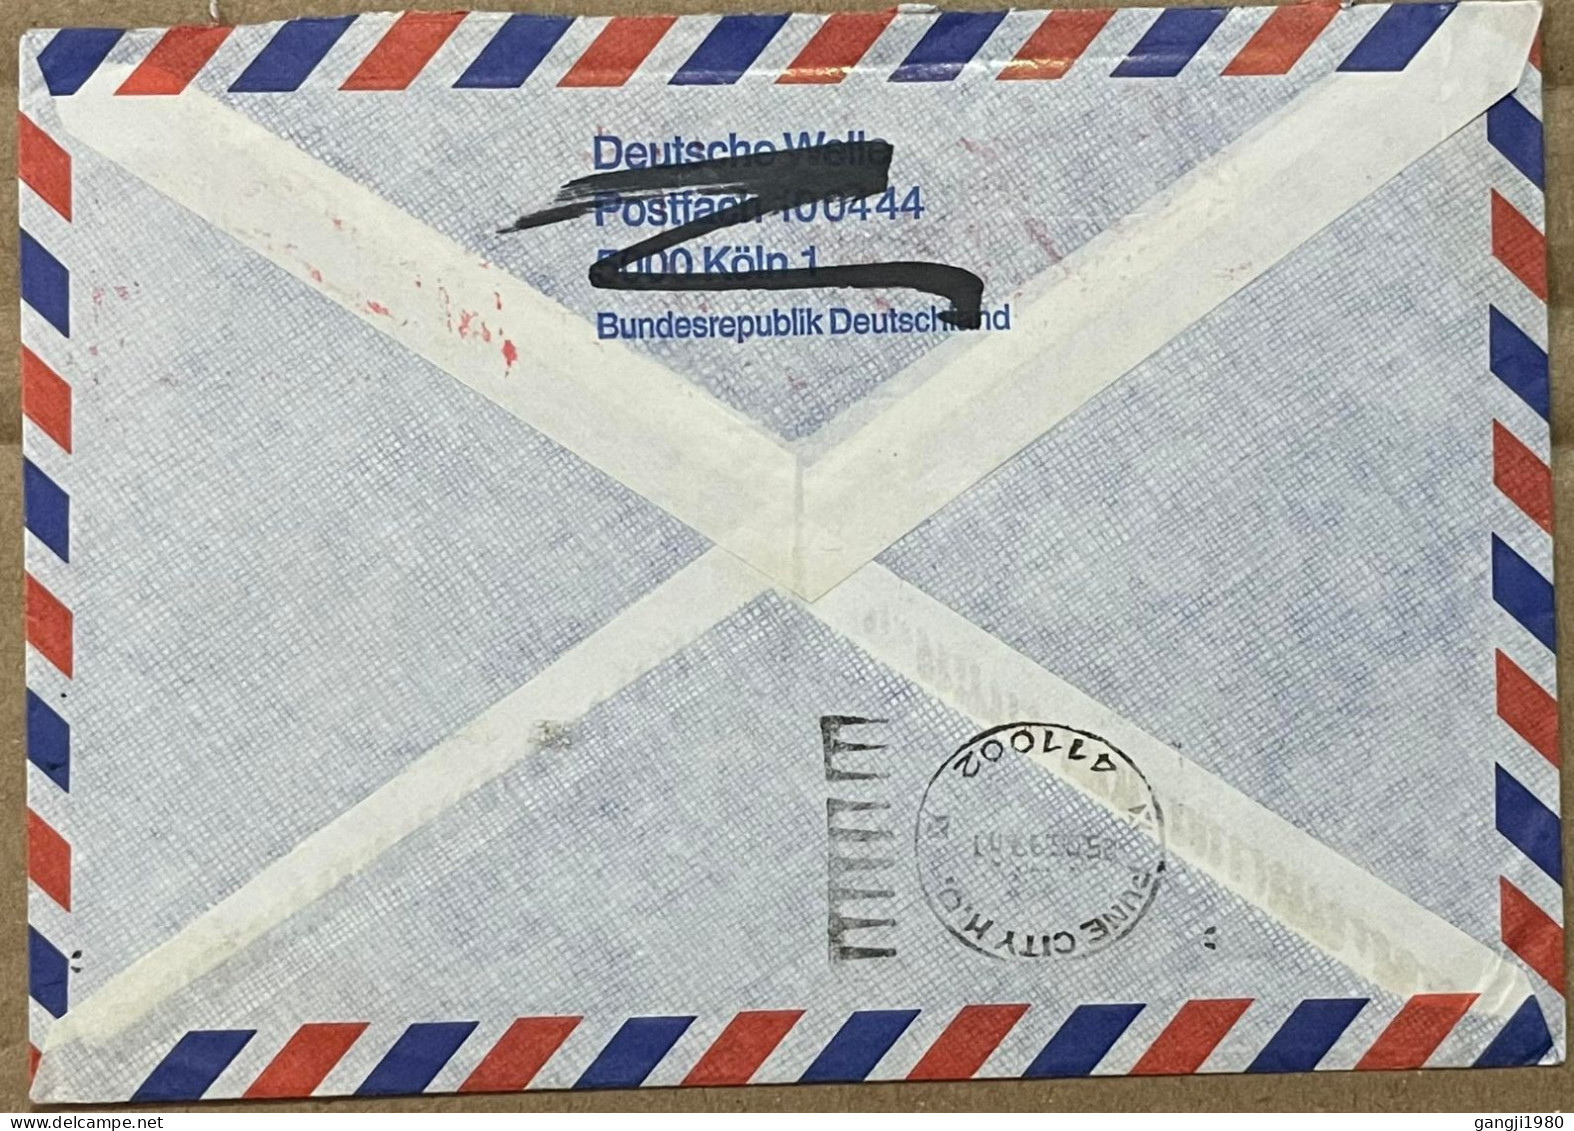 HONG KONG 1999, COVER USED TO INDIA, METER MACHINE SLOGAN CANCEL, MAIL FAST AIRMAIL PRINTED MATTER, POSTAGE PAID - Brieven En Documenten